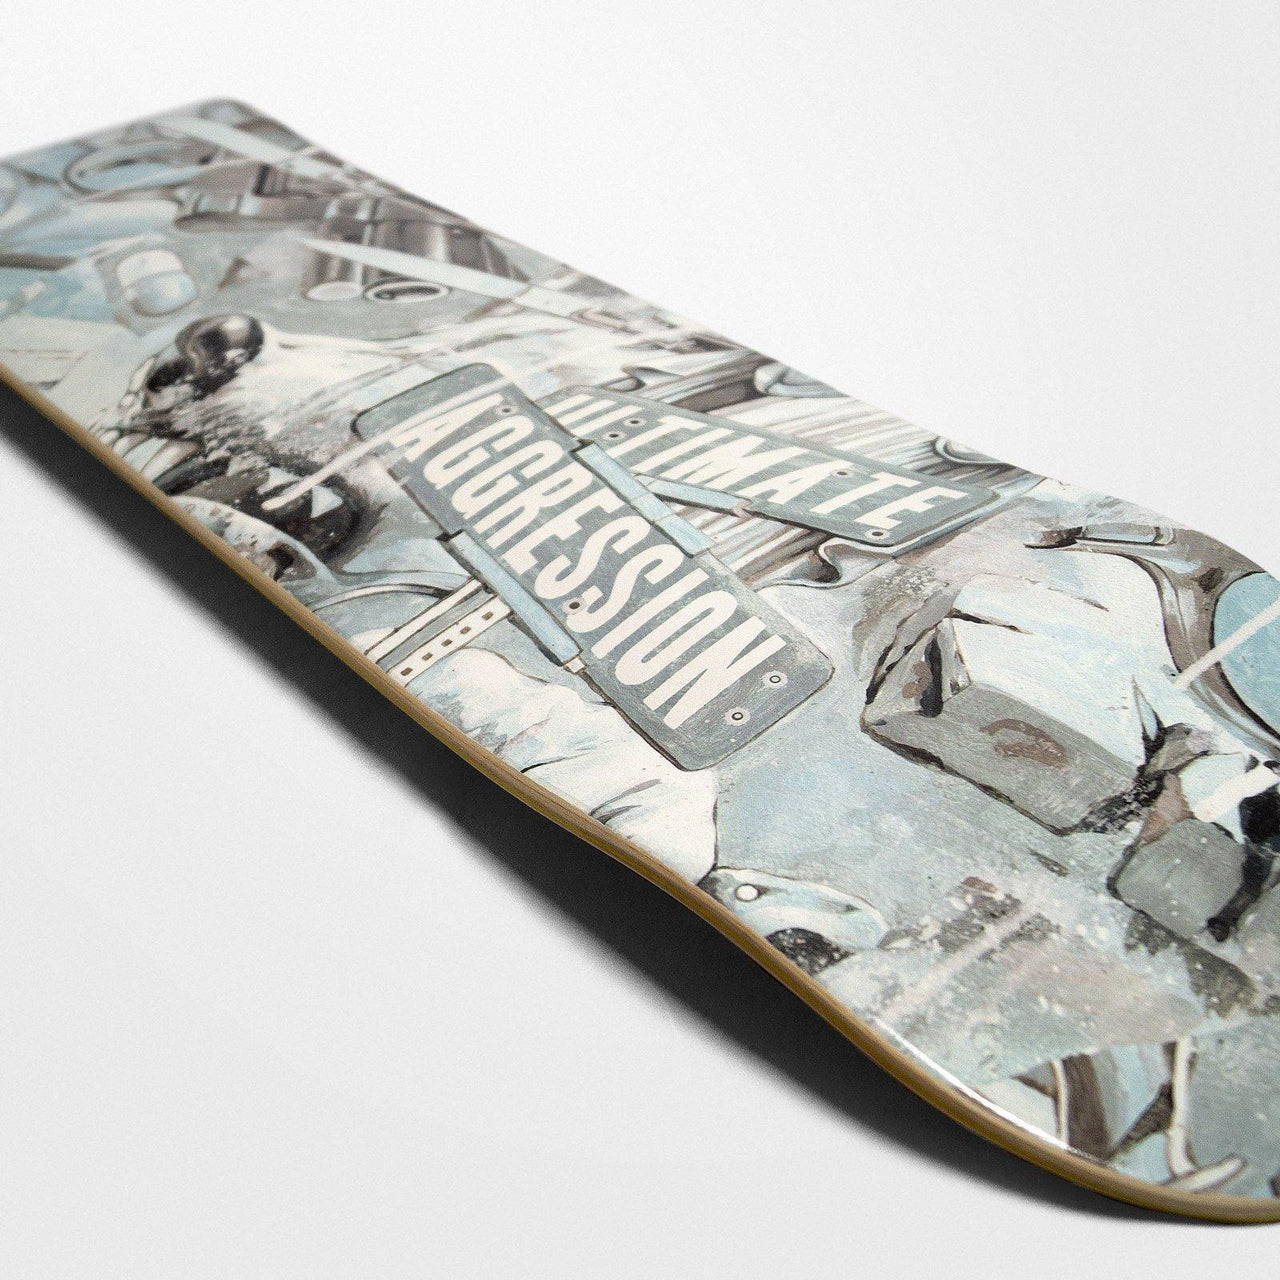 Buy – Year of The Knife "Ultimate Aggression" Skate Deck – Band & Music Merch – Cold Cuts Merch